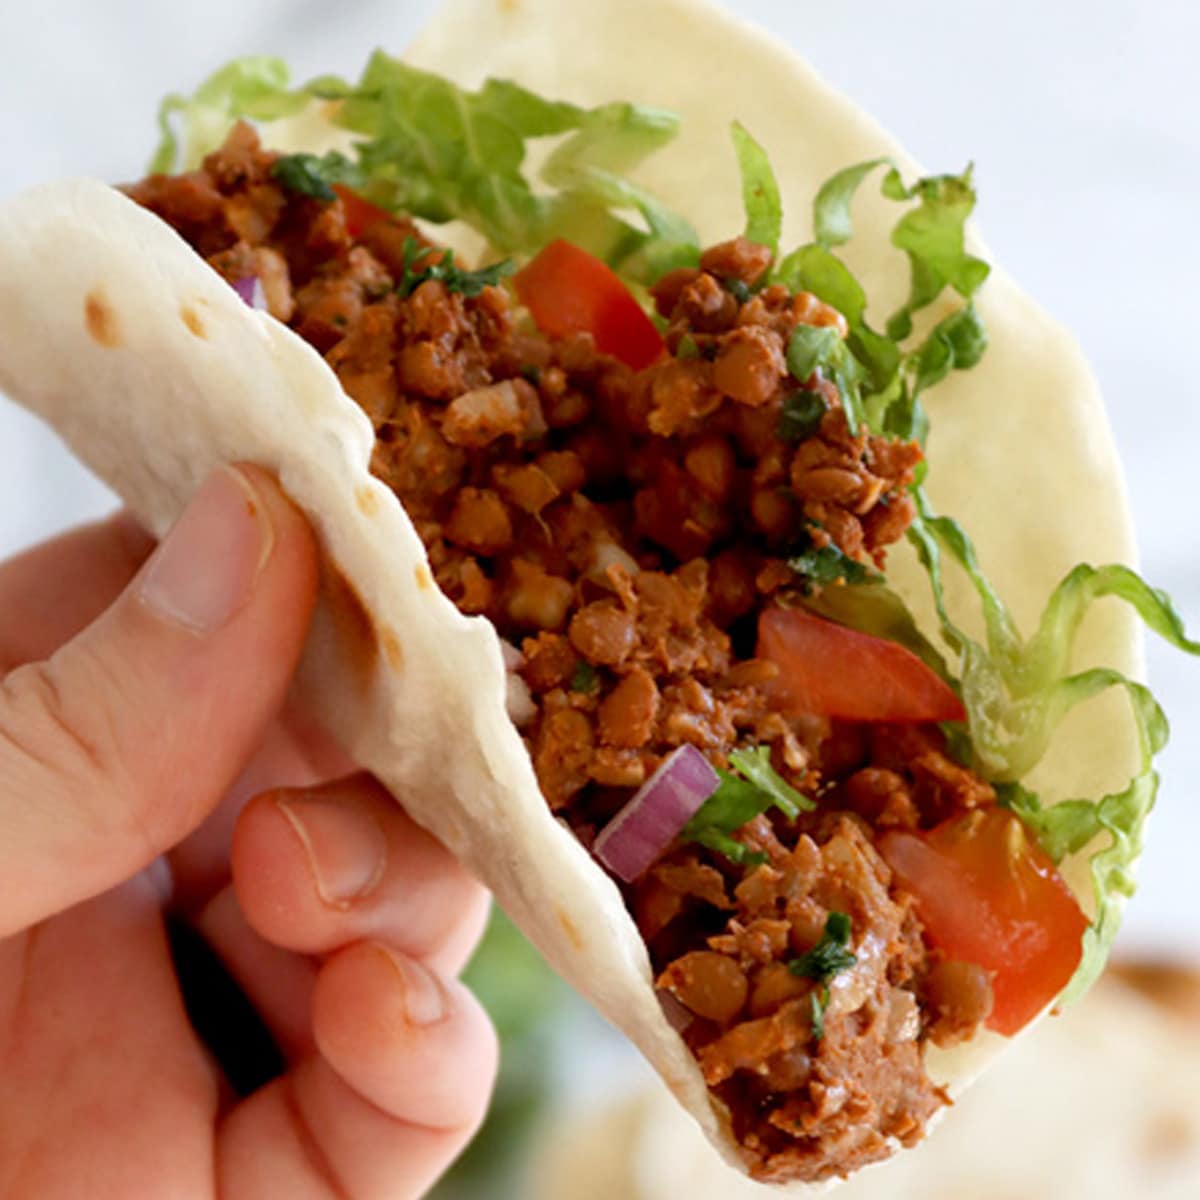 Close up of a hand holding a small taco filled with lentil walnut "meat", lettuce, tomato and onion.